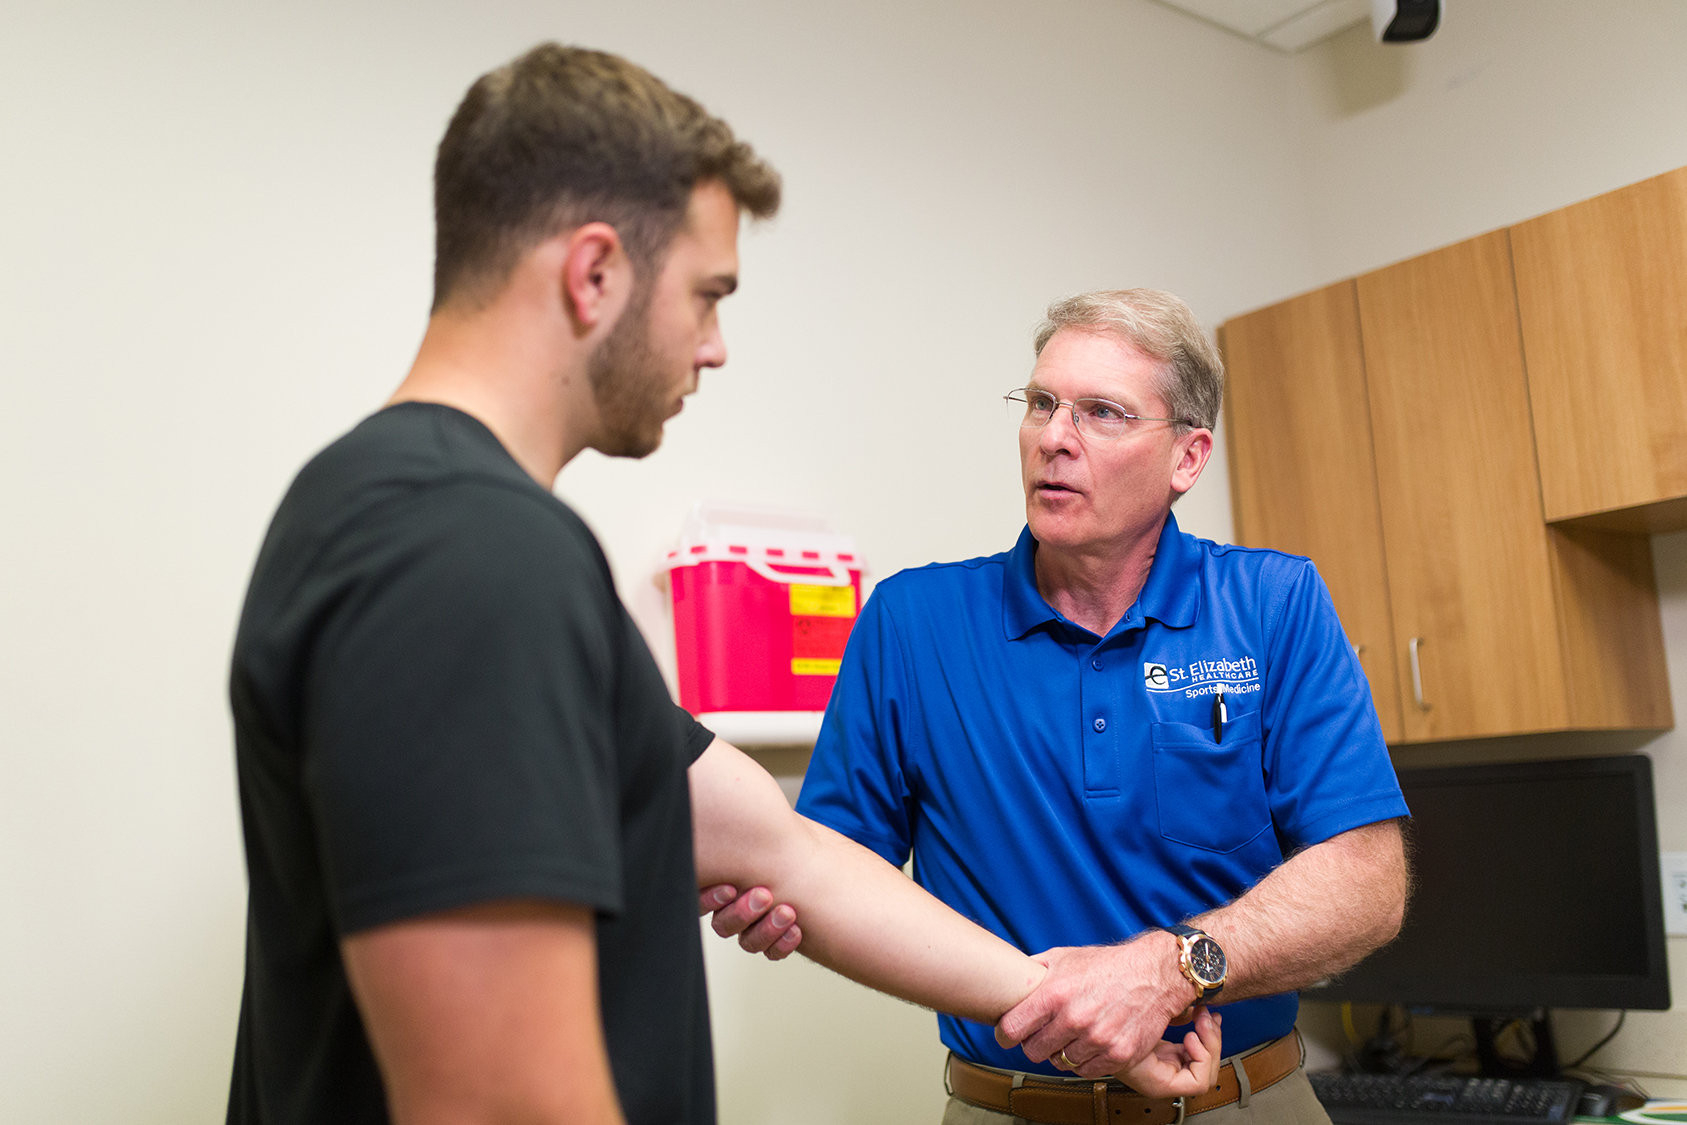 Dr. Miller examines male athlete's arm